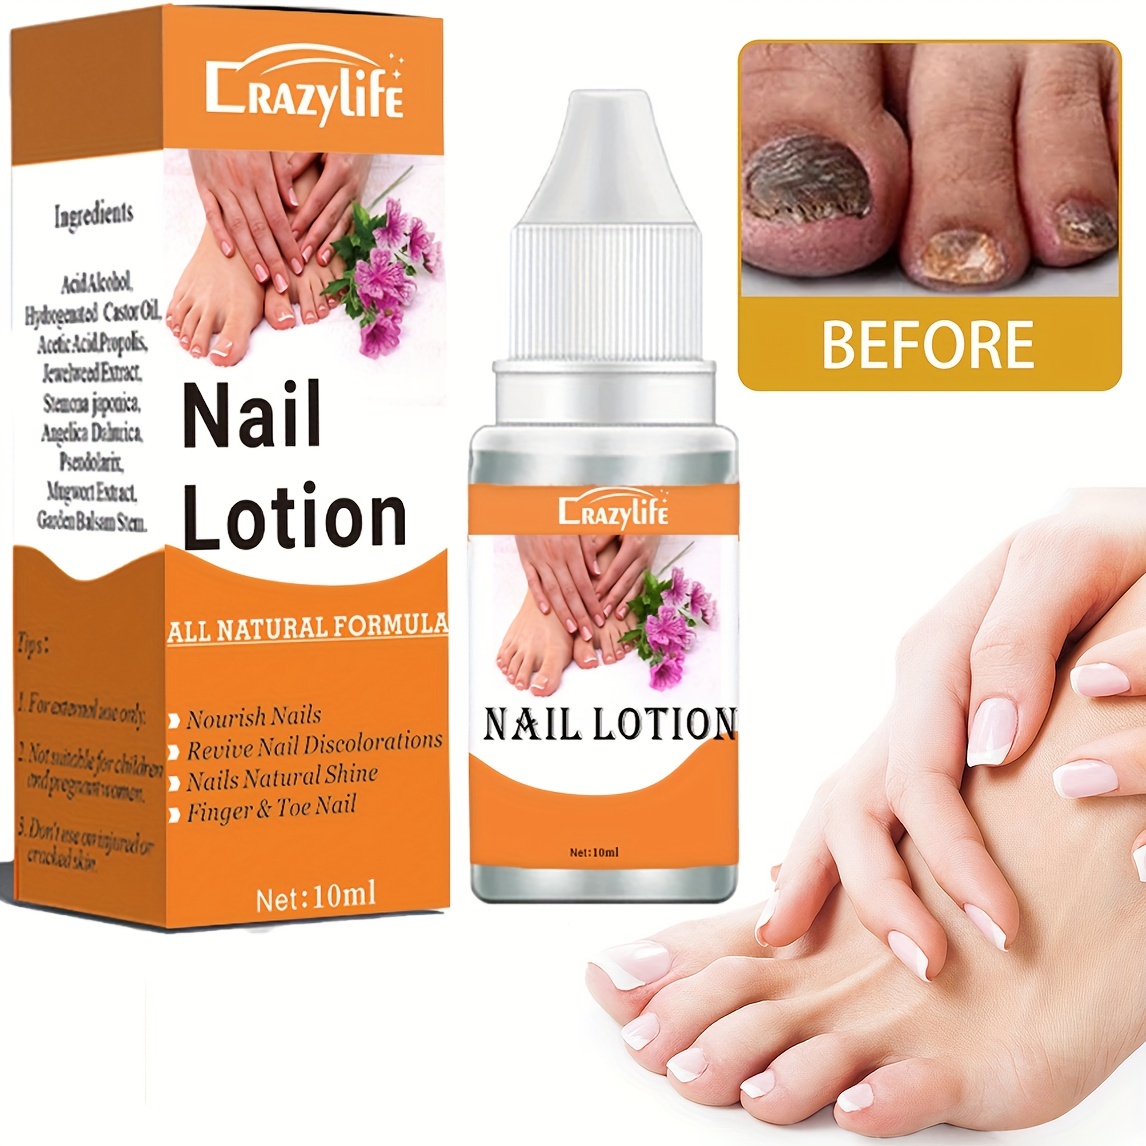 Is Laser Nail Fungus Treatment Effective? - Sun City Medical Clinic